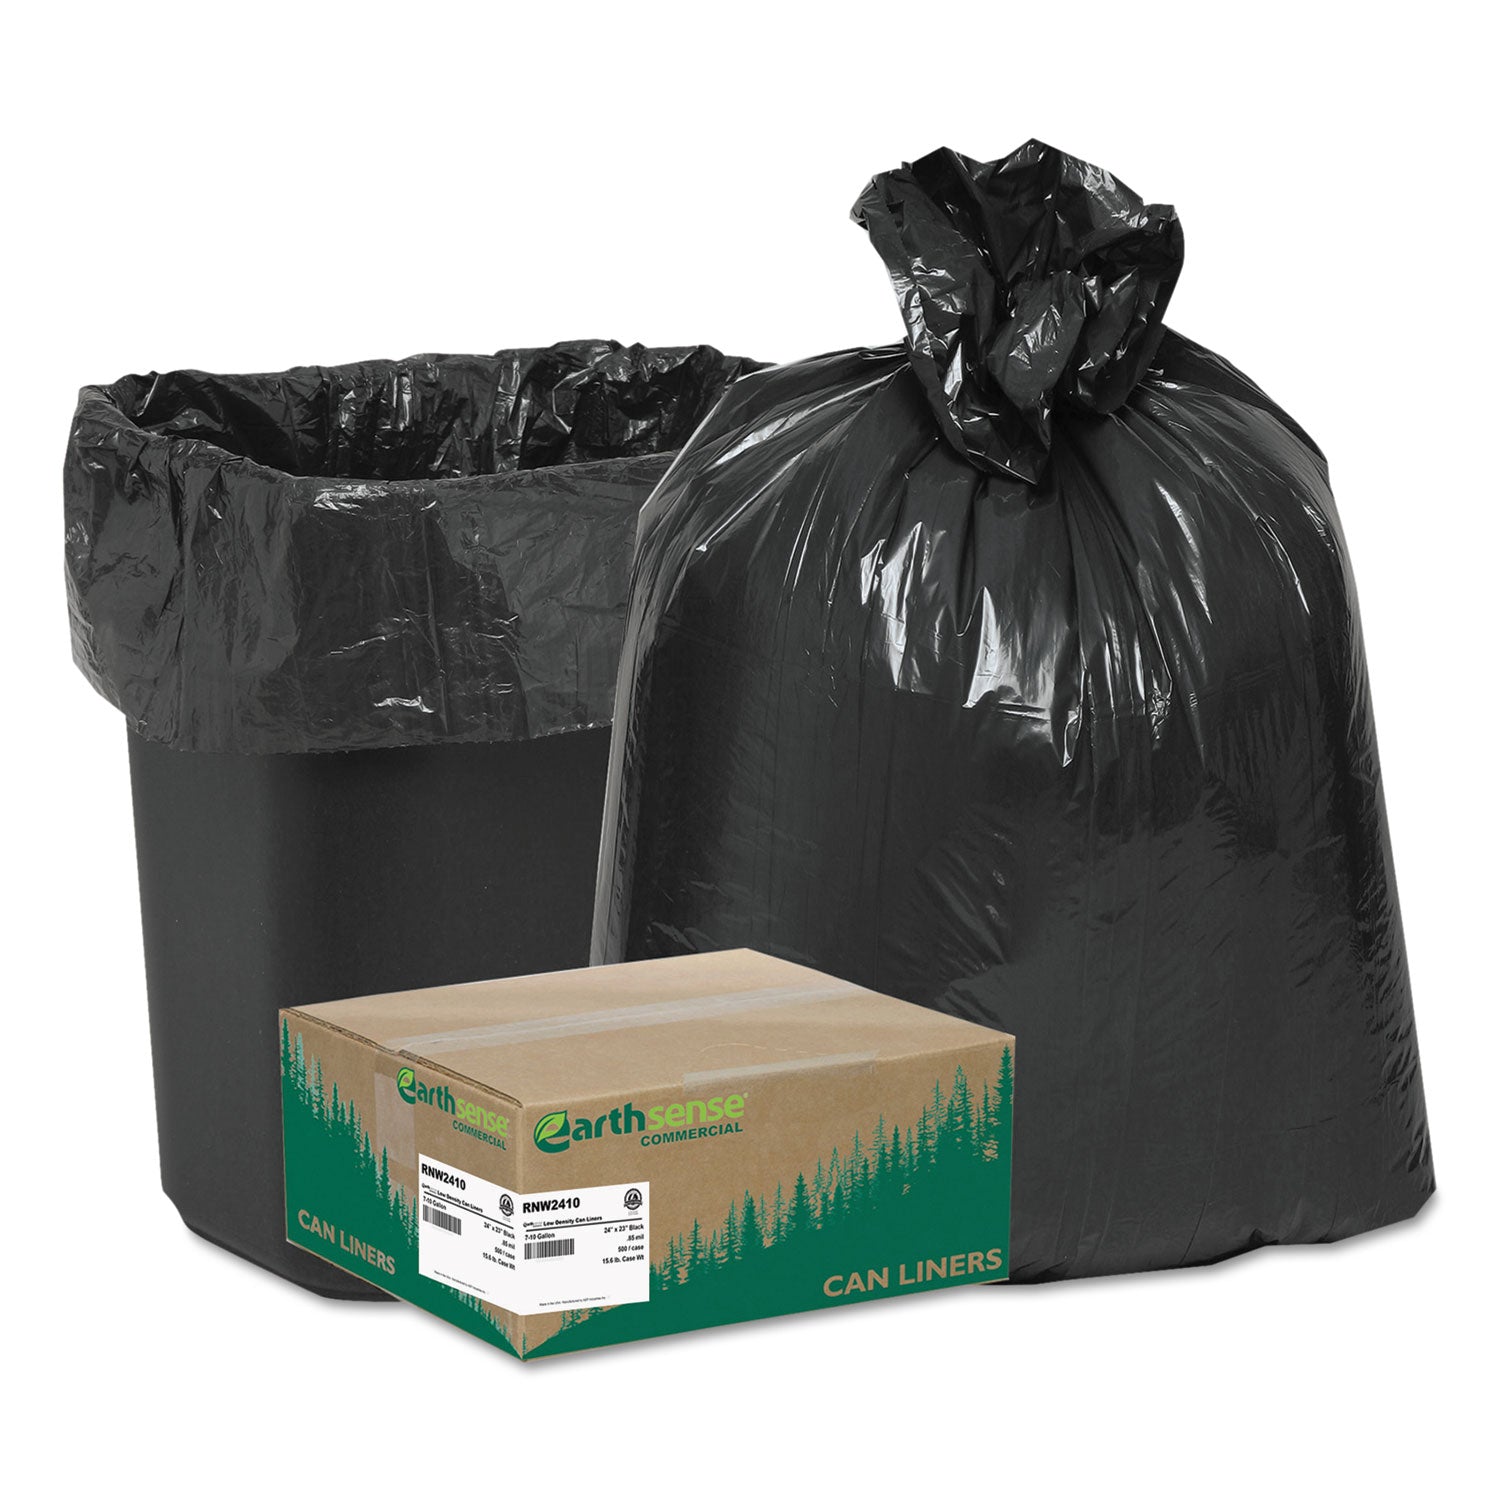 linear-low-density-recycled-can-liners-10-gal-085-mil-24-x-23-black-25-bags-roll-20-rolls-carton_wbirnw2410 - 1